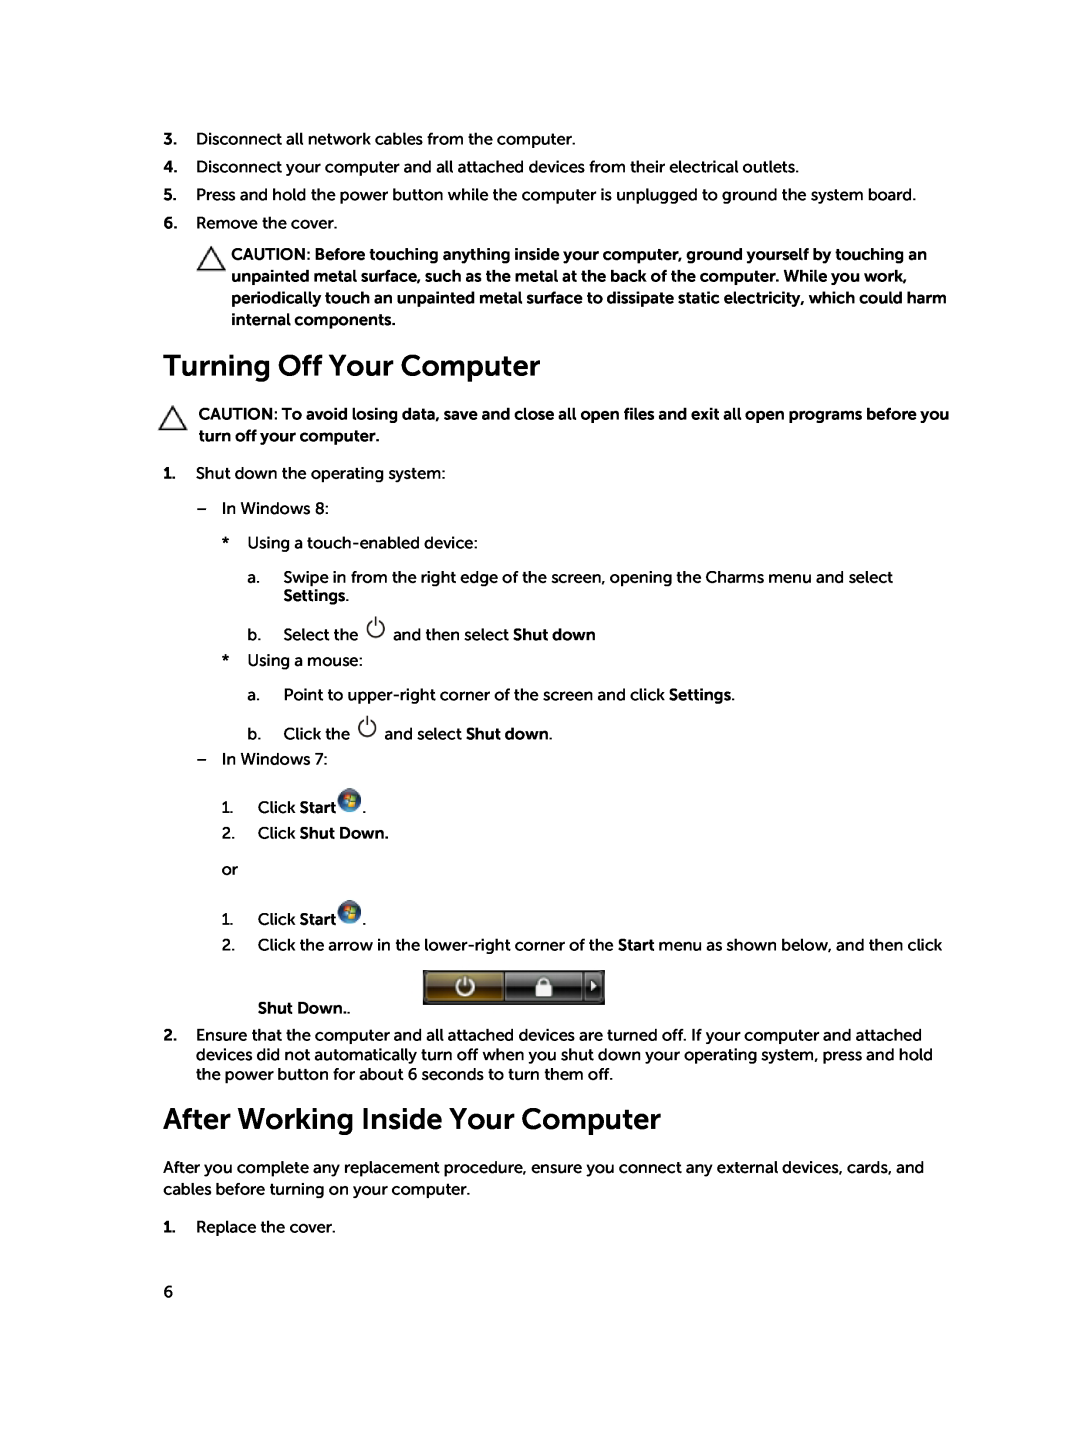 Dell D15M owner manual Turning Off Your Computer, After Working Inside Your Computer 